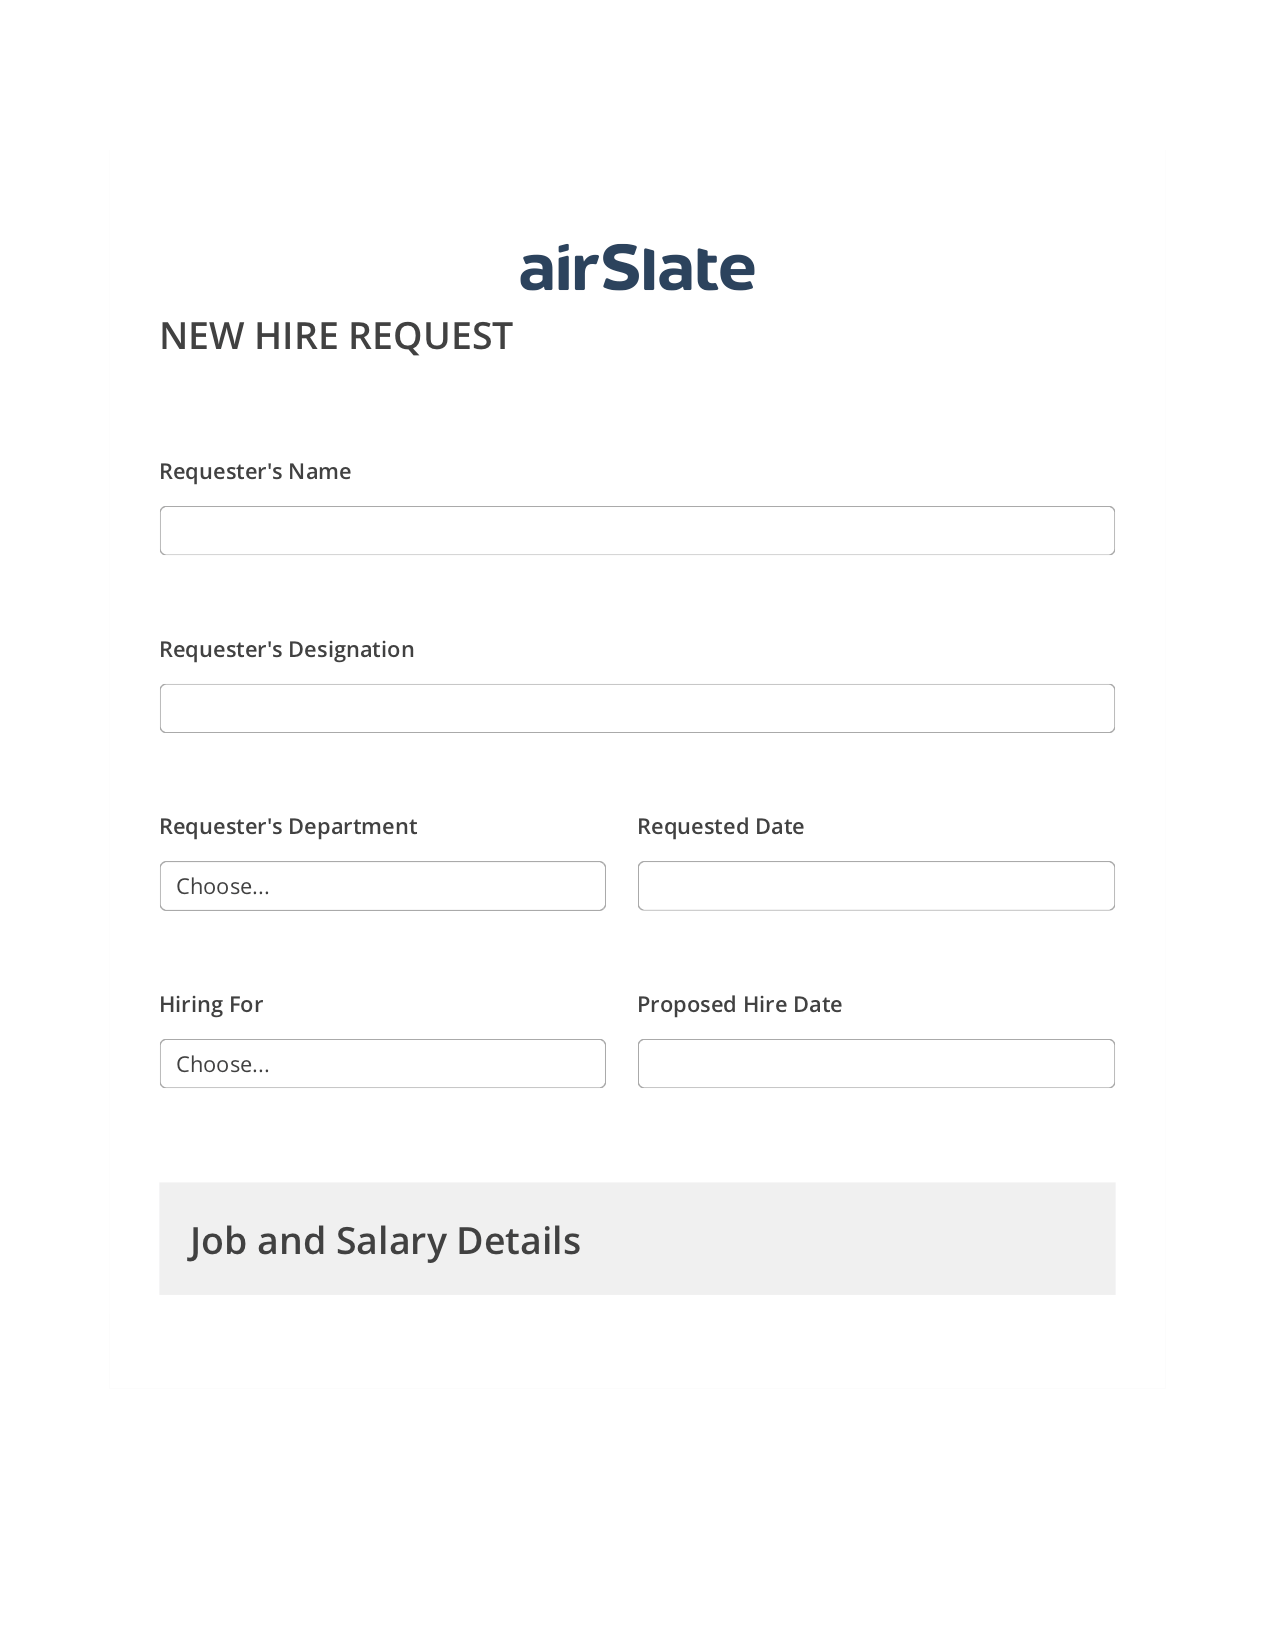 Hiring Request Workflow Pre-fill Dropdowns from Excel Bot, System Bot - Create a Slate in another Flow, Export to Salesforce Record Bot